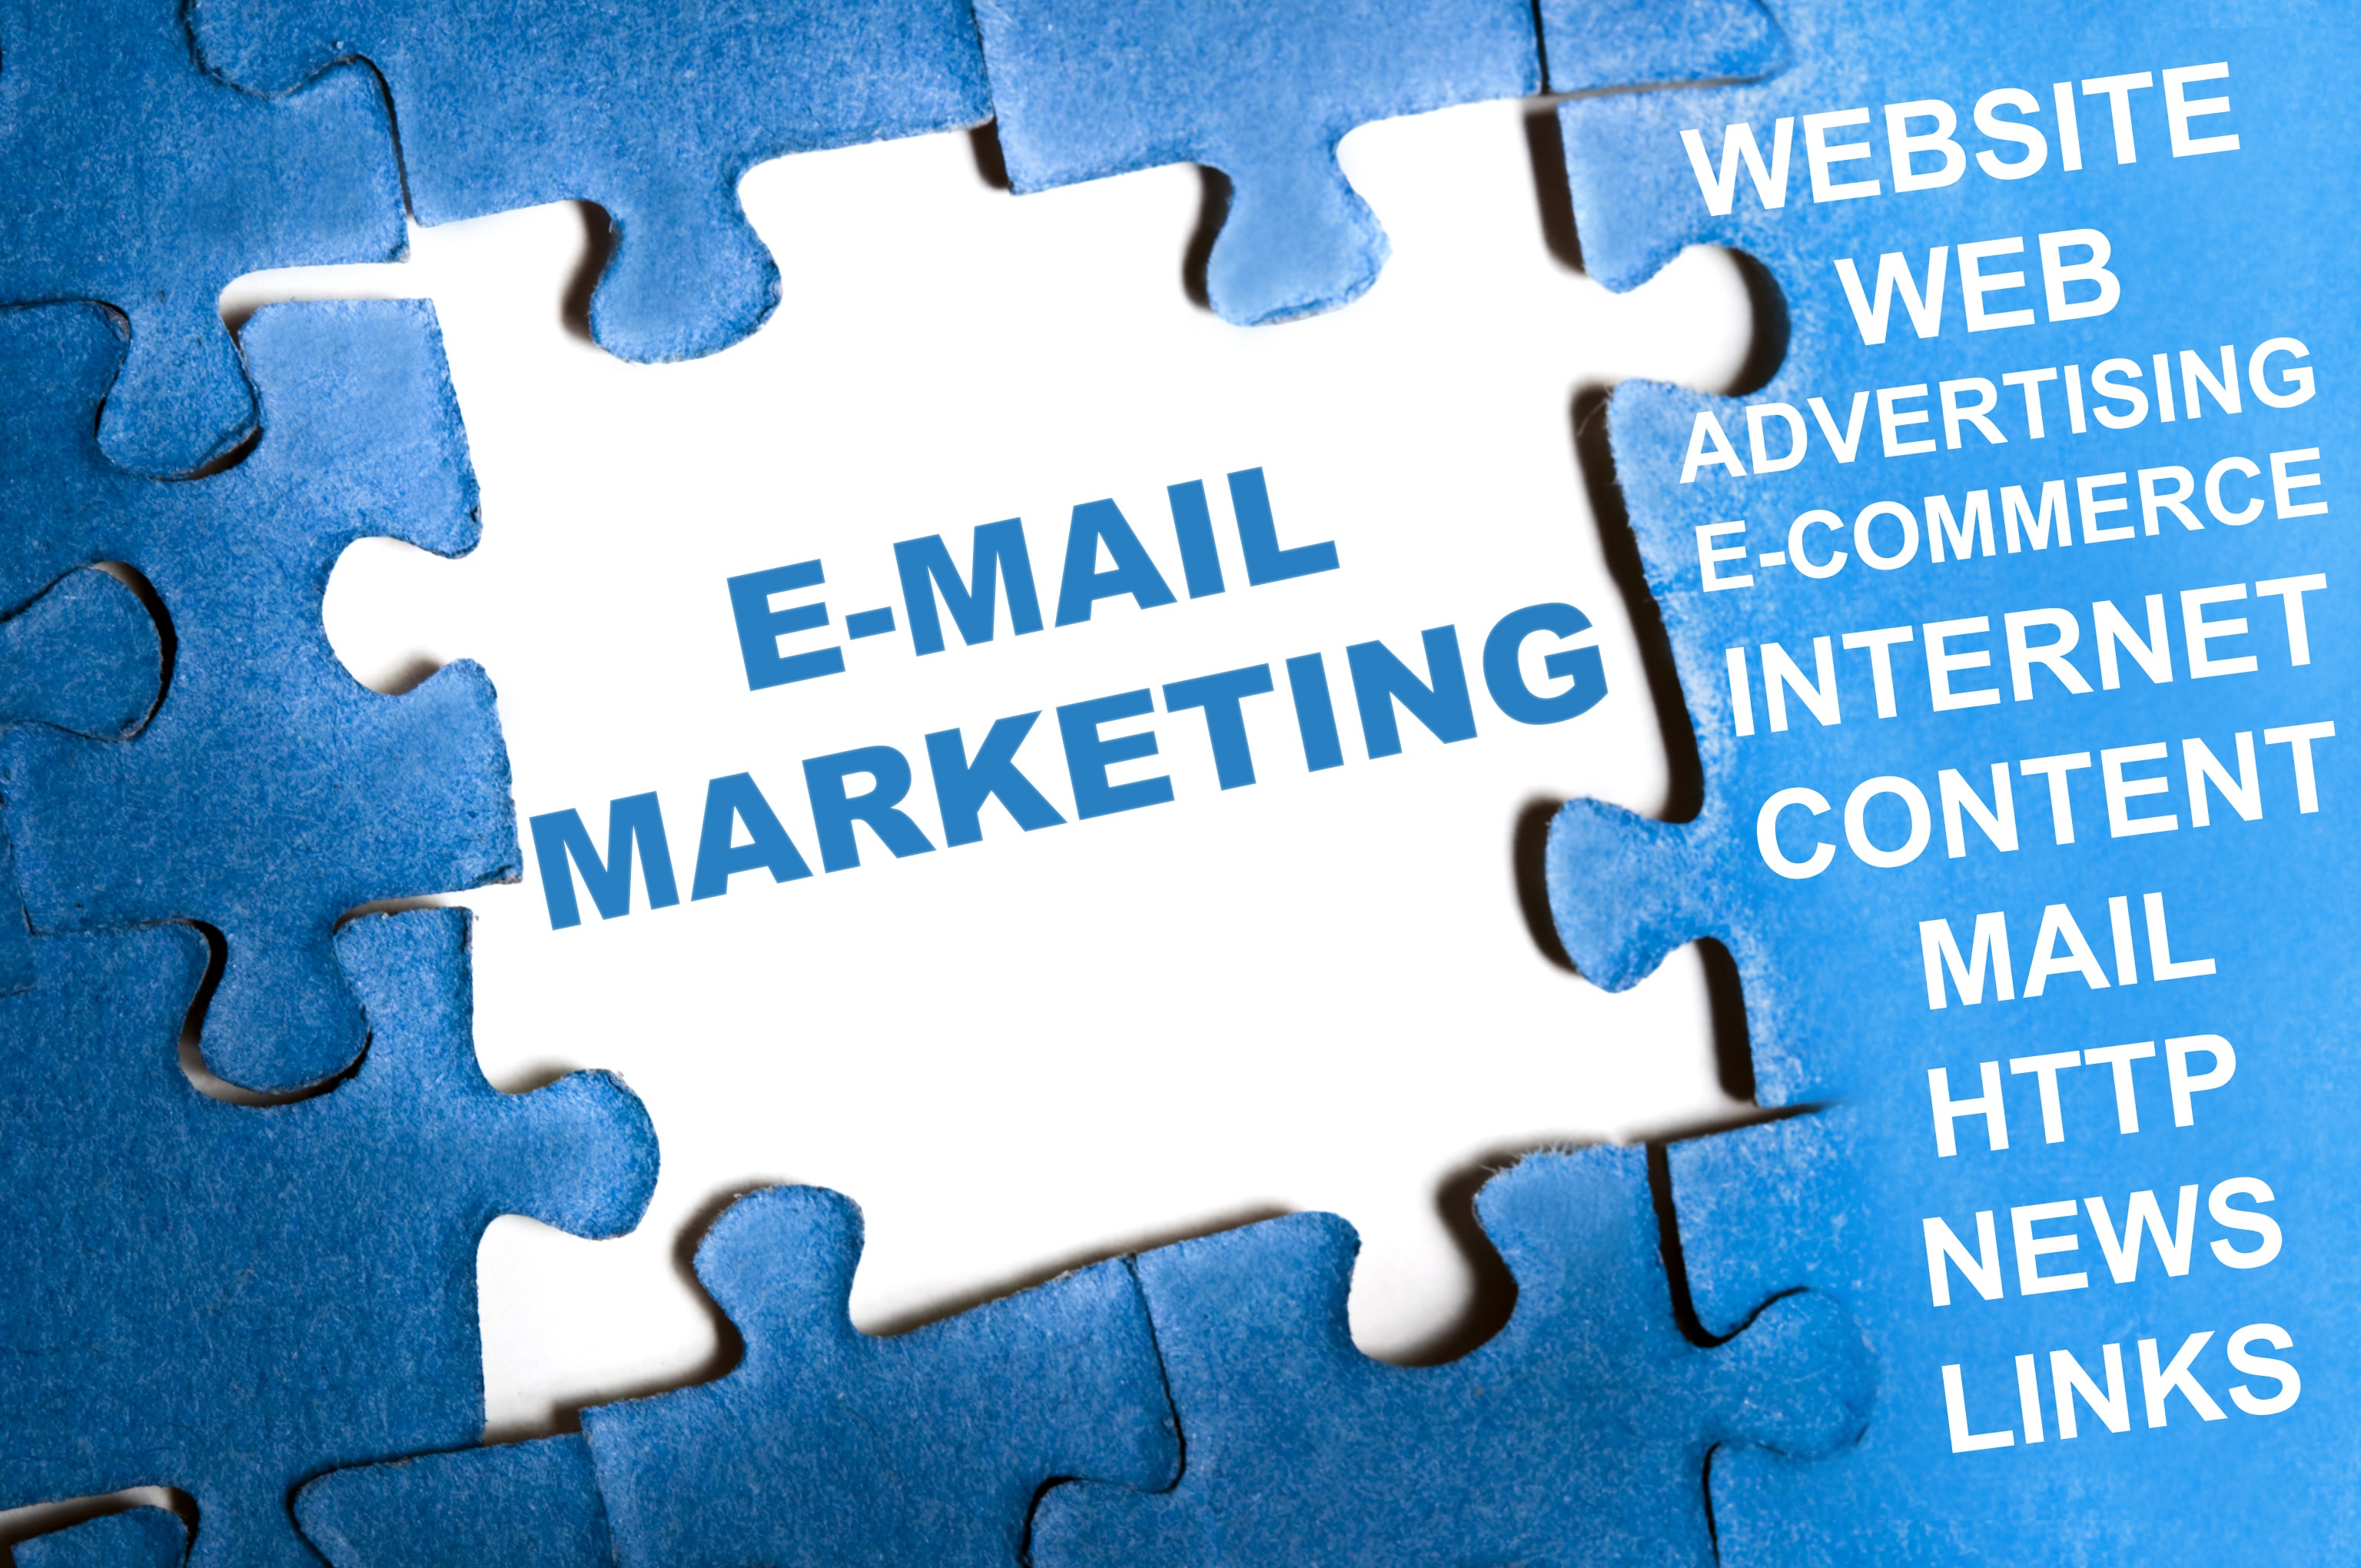 EMAIL MARKETING IS SMART FOR SMALL BUSINESSES